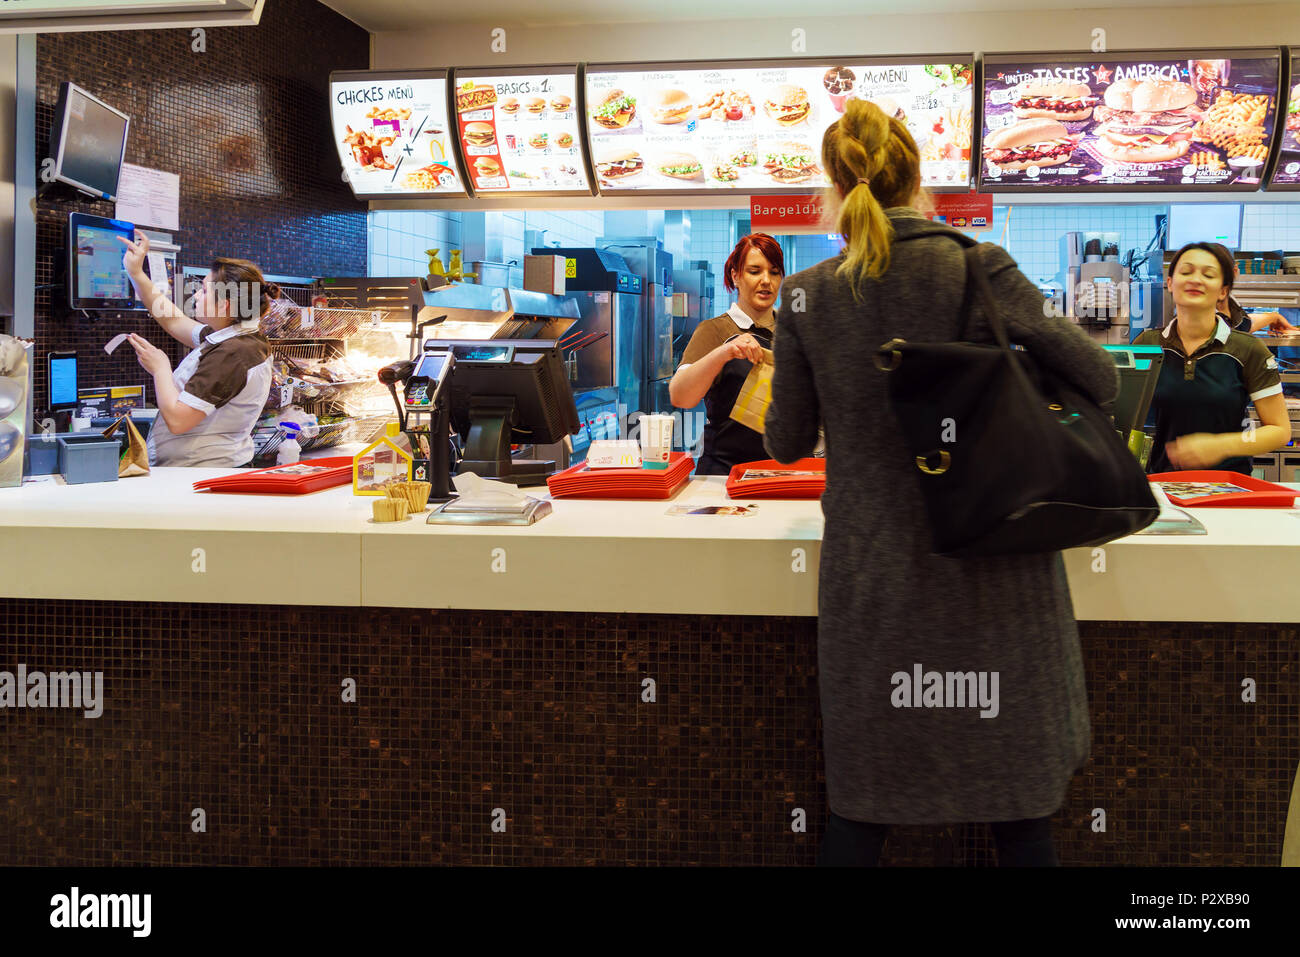 Munich, Germany - October 24, 2017: The girl receives an order in the interior of the McDonald's fast-food restaurant Stock Photo